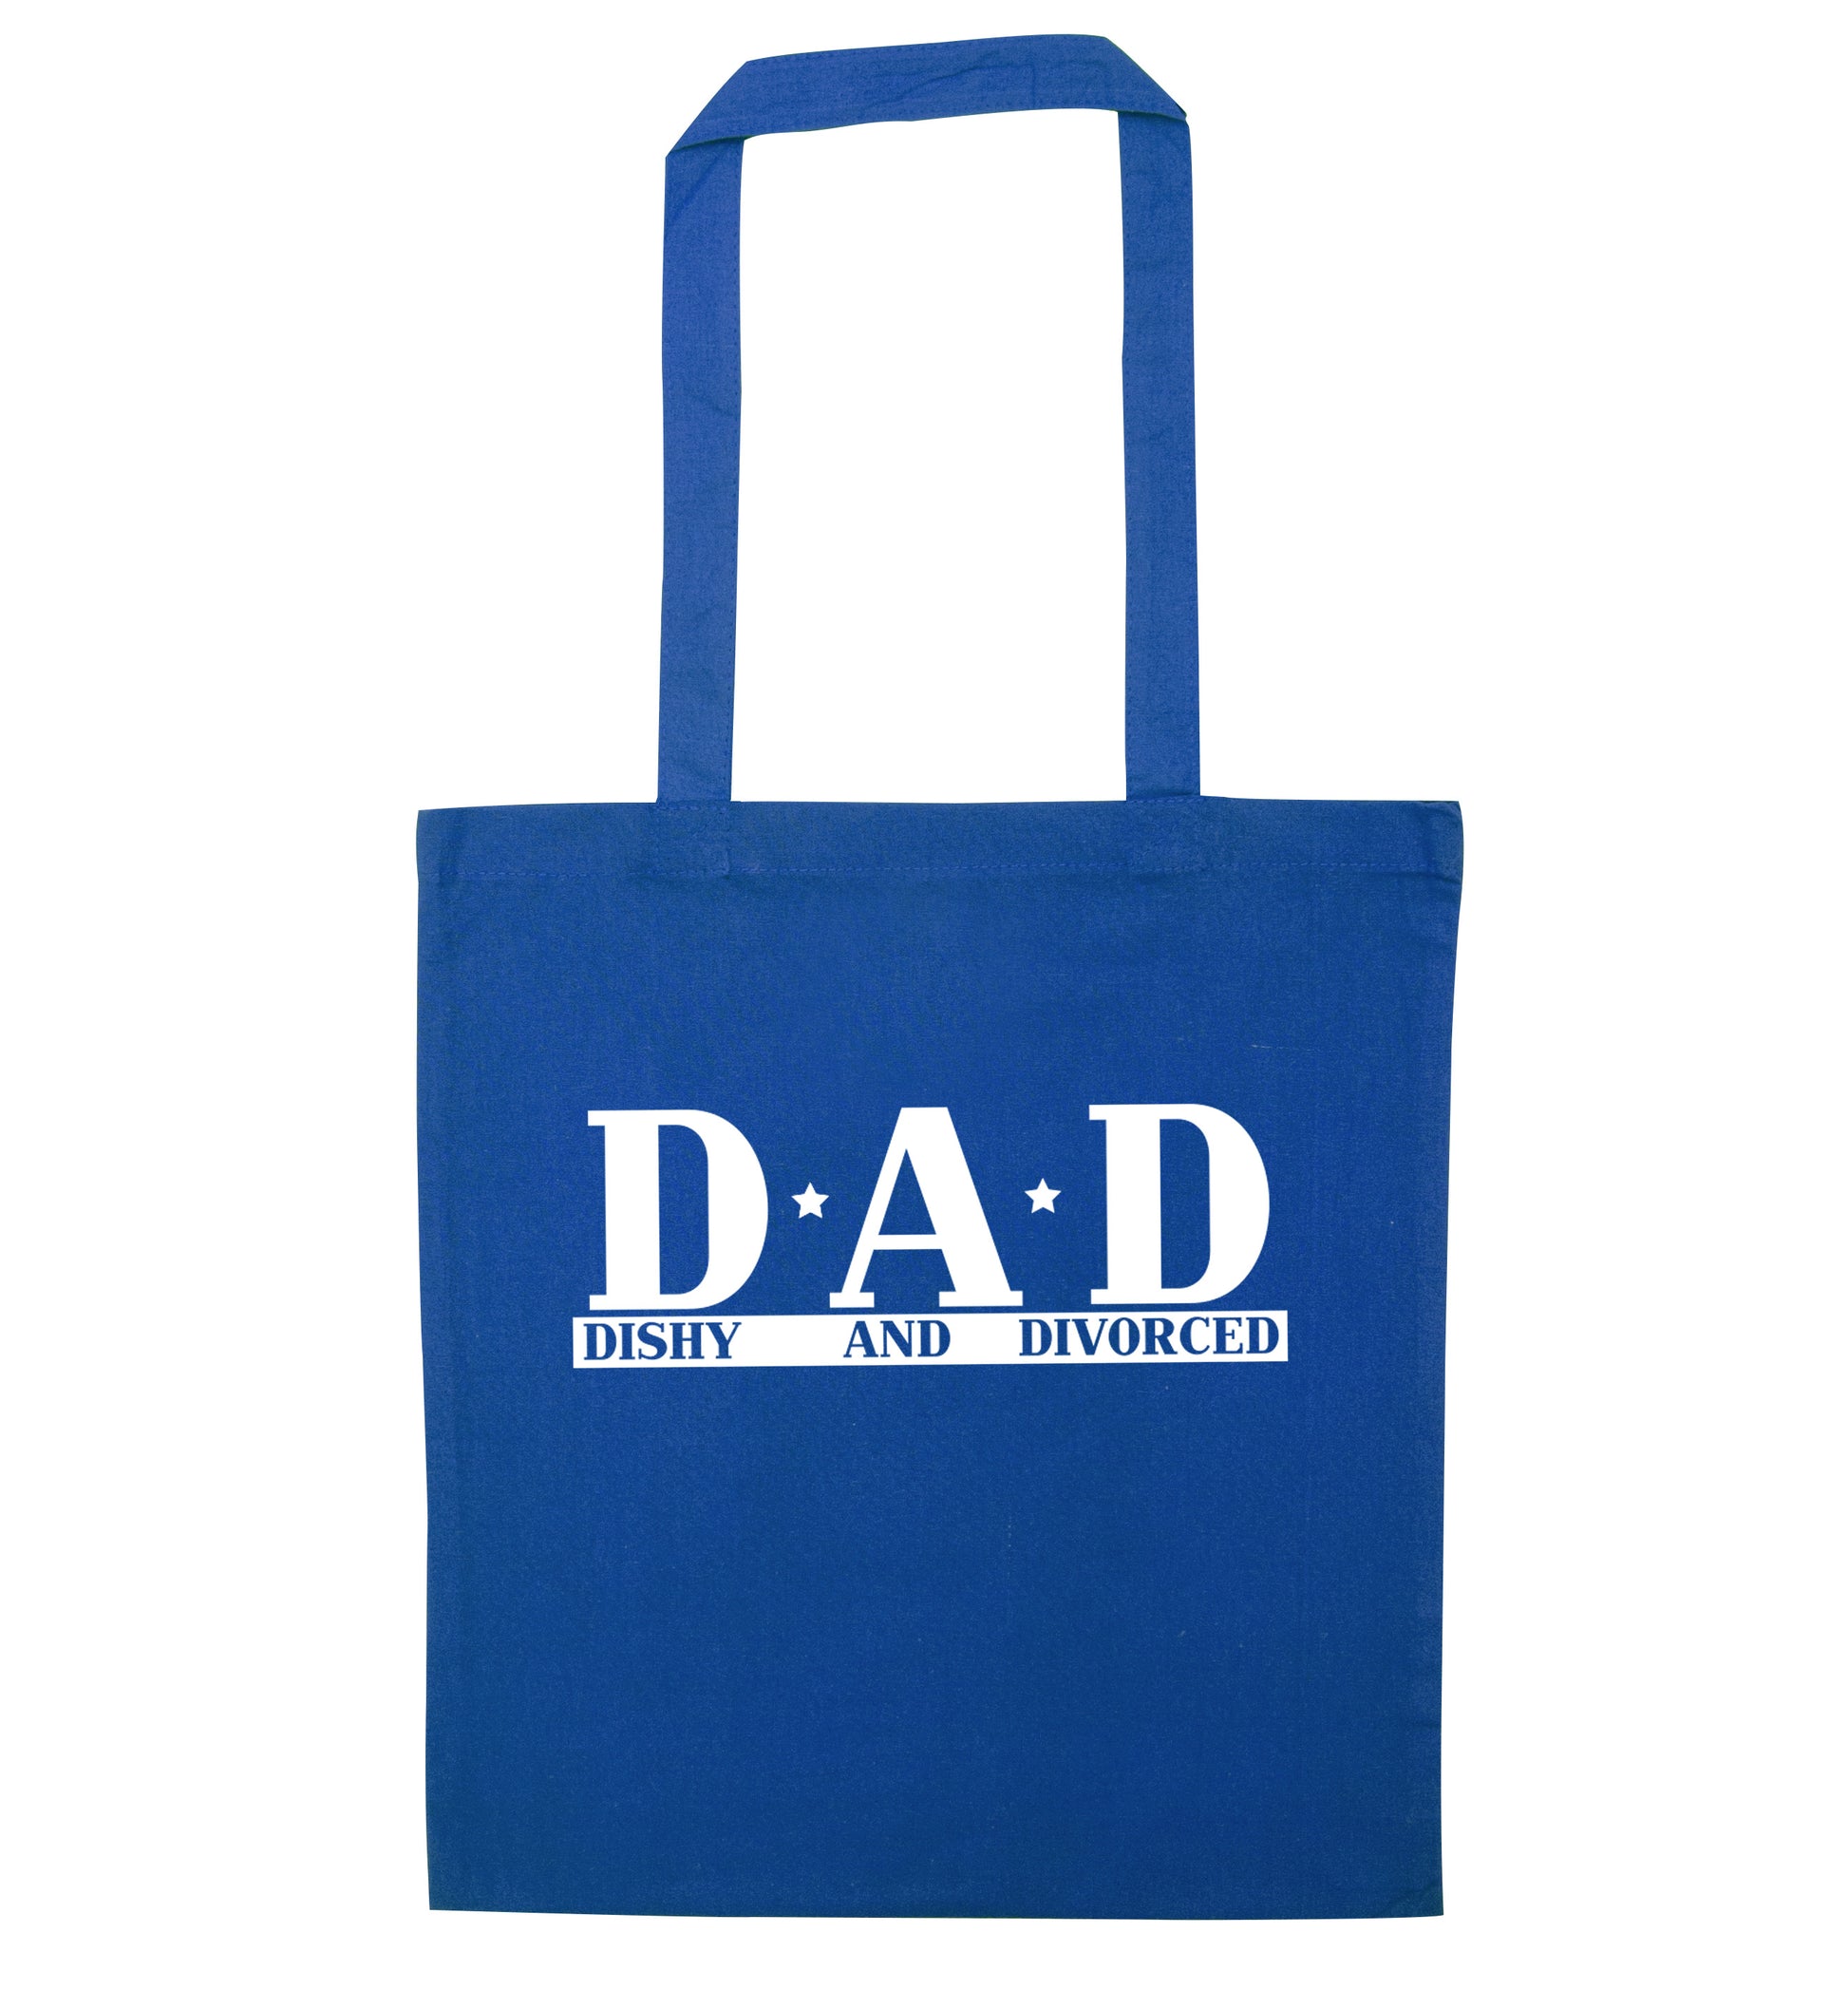 D.A.D meaning Dishy and Divorced blue tote bag